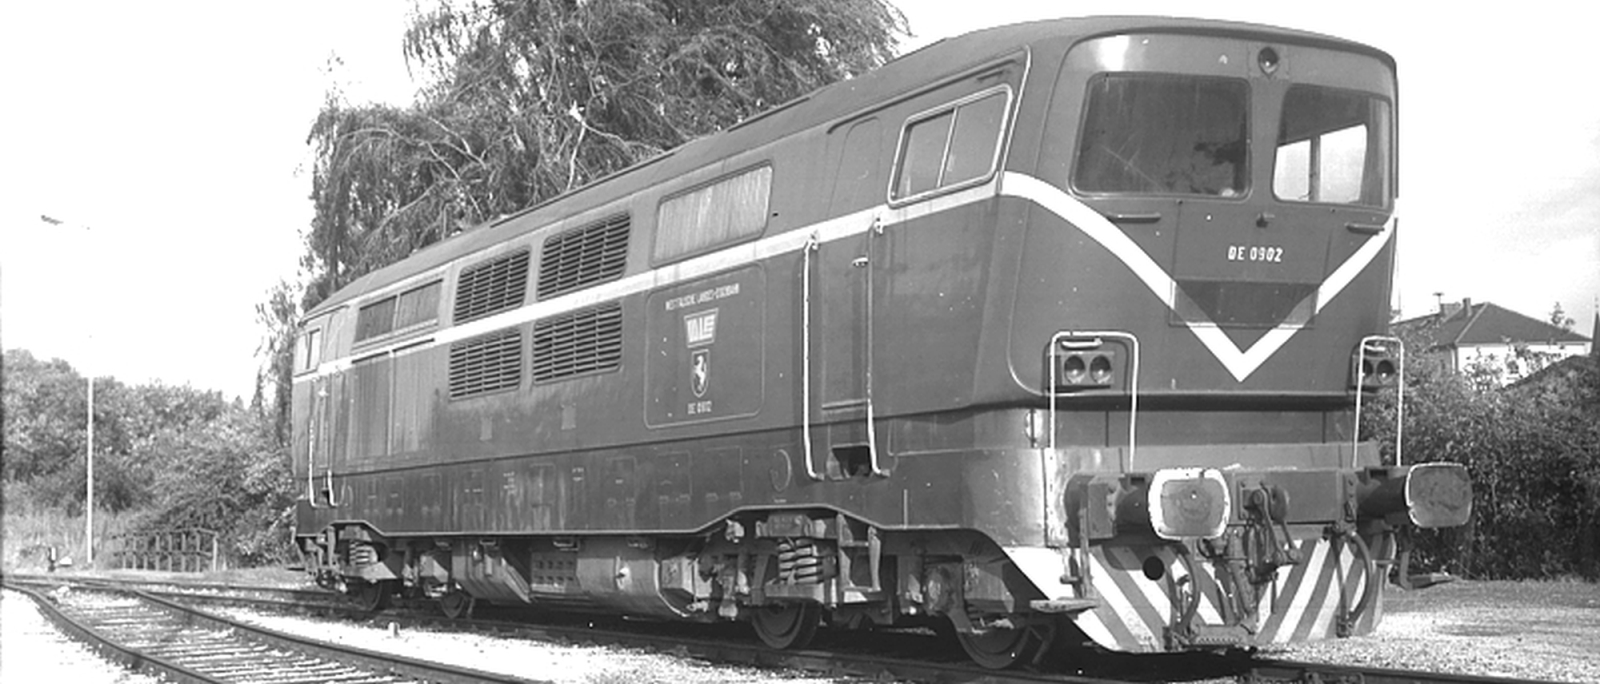 The locomotive as DE 0902 of the WLE in September 1978 in Lippstadt shortly before scrapping after the engine had already been removed